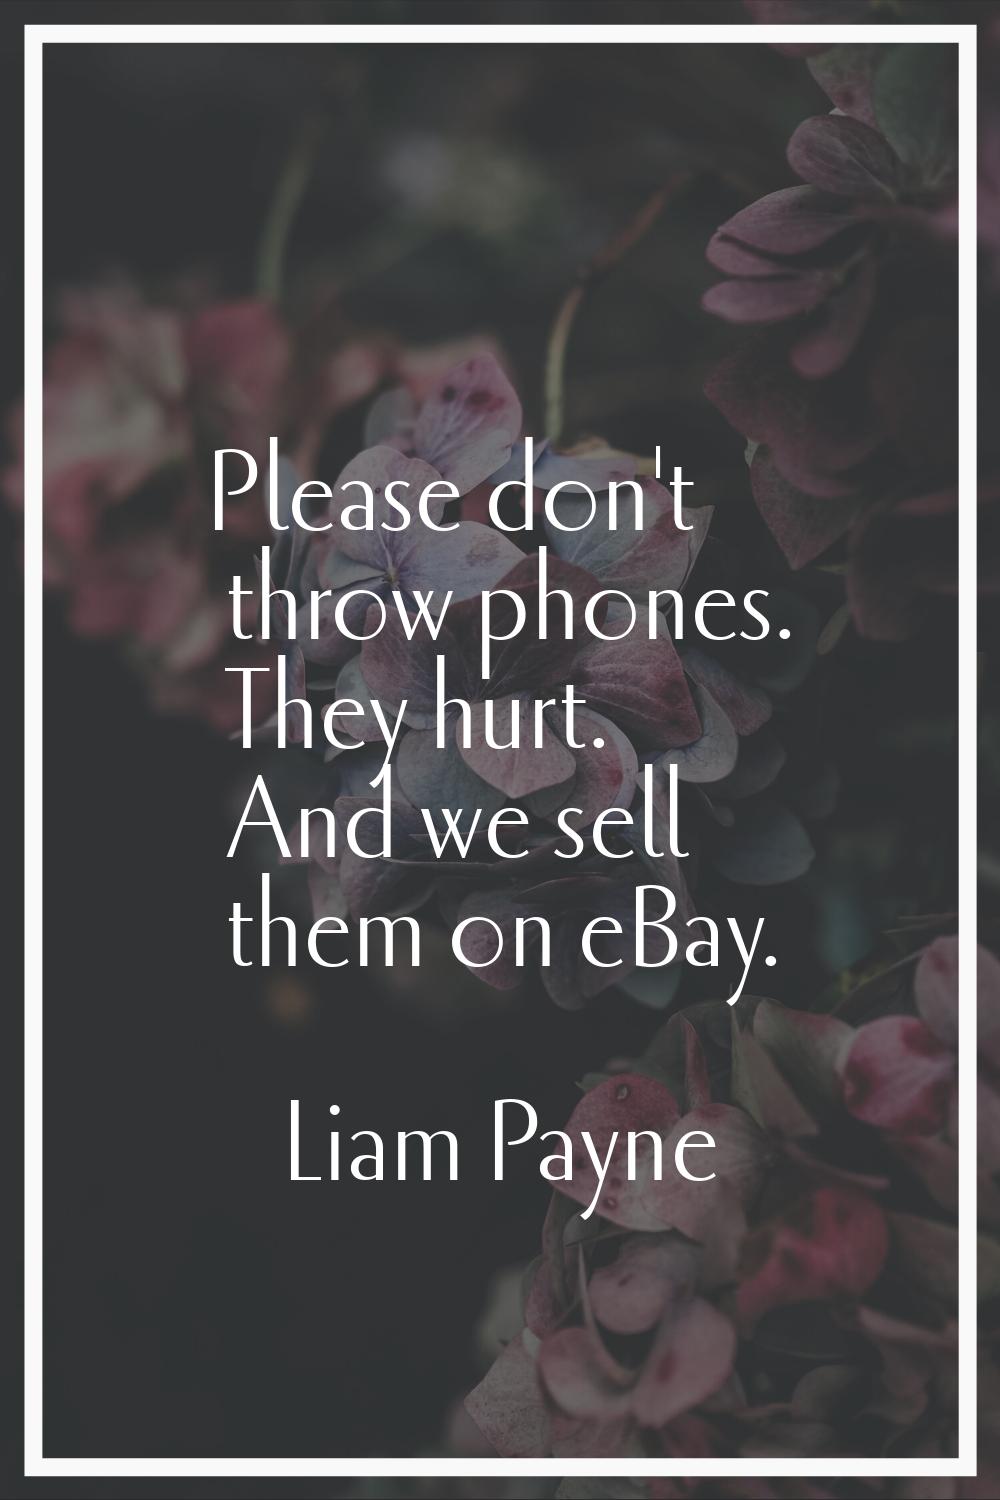 Please don't throw phones. They hurt. And we sell them on eBay.